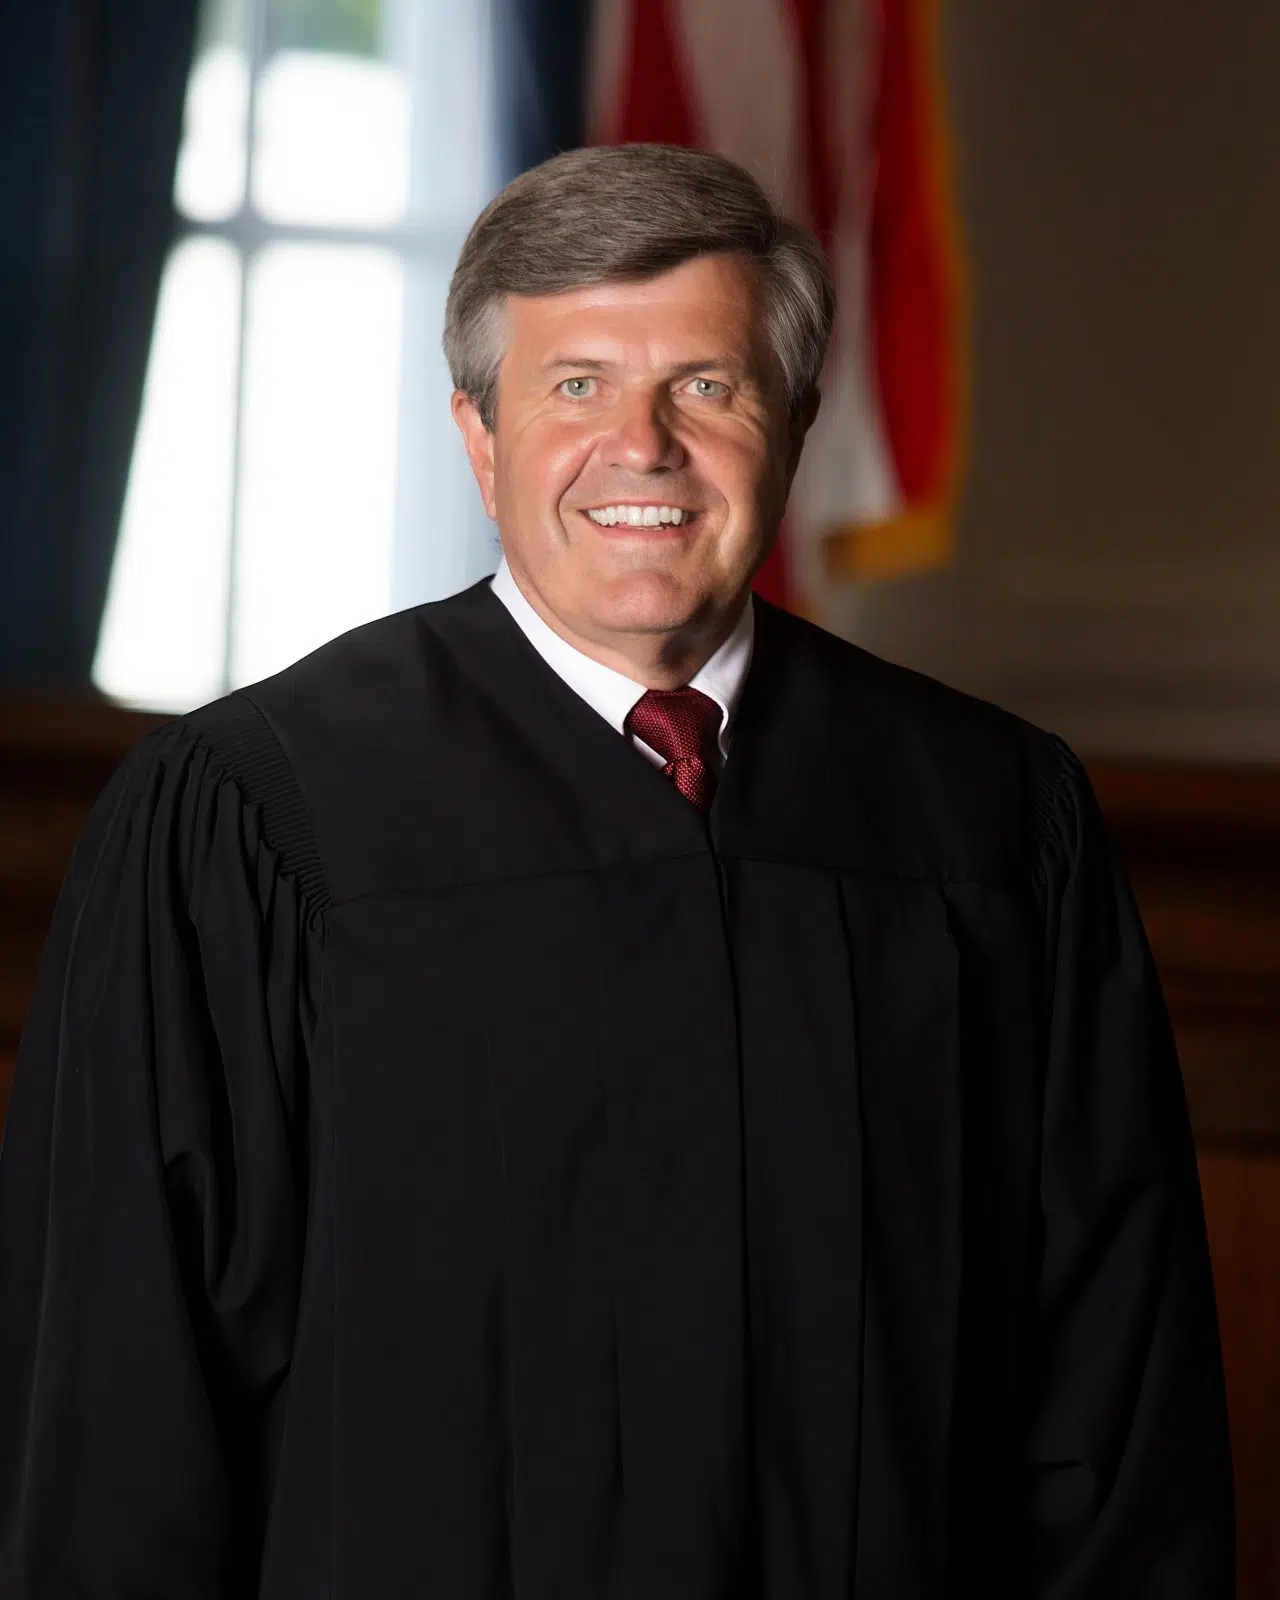 Judge Schwarm named presiding judge of fifth district